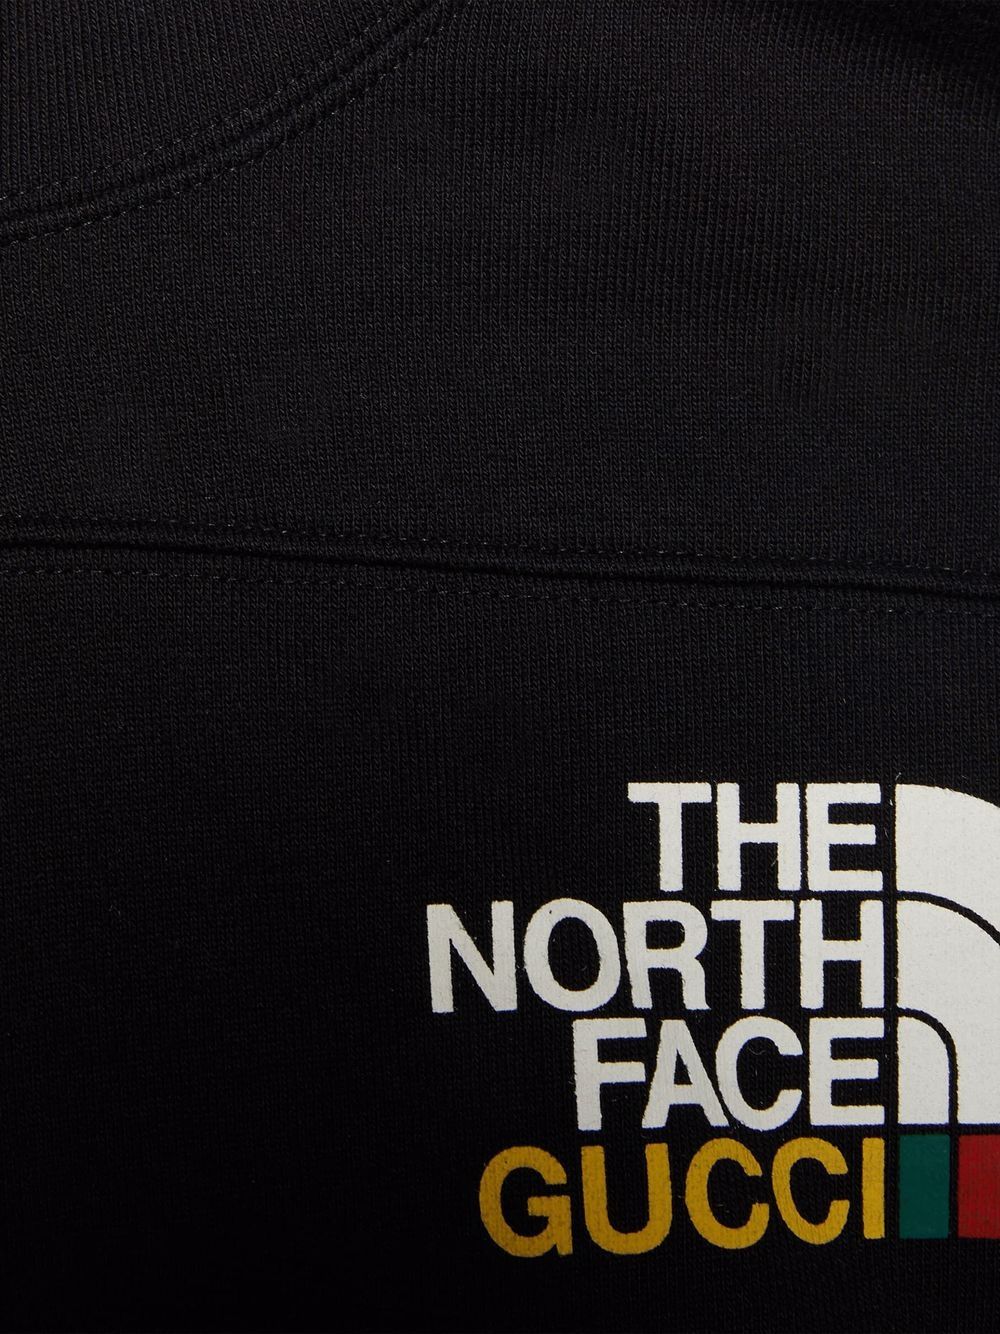 Gucci x The North Face Hoodie - Farfetch